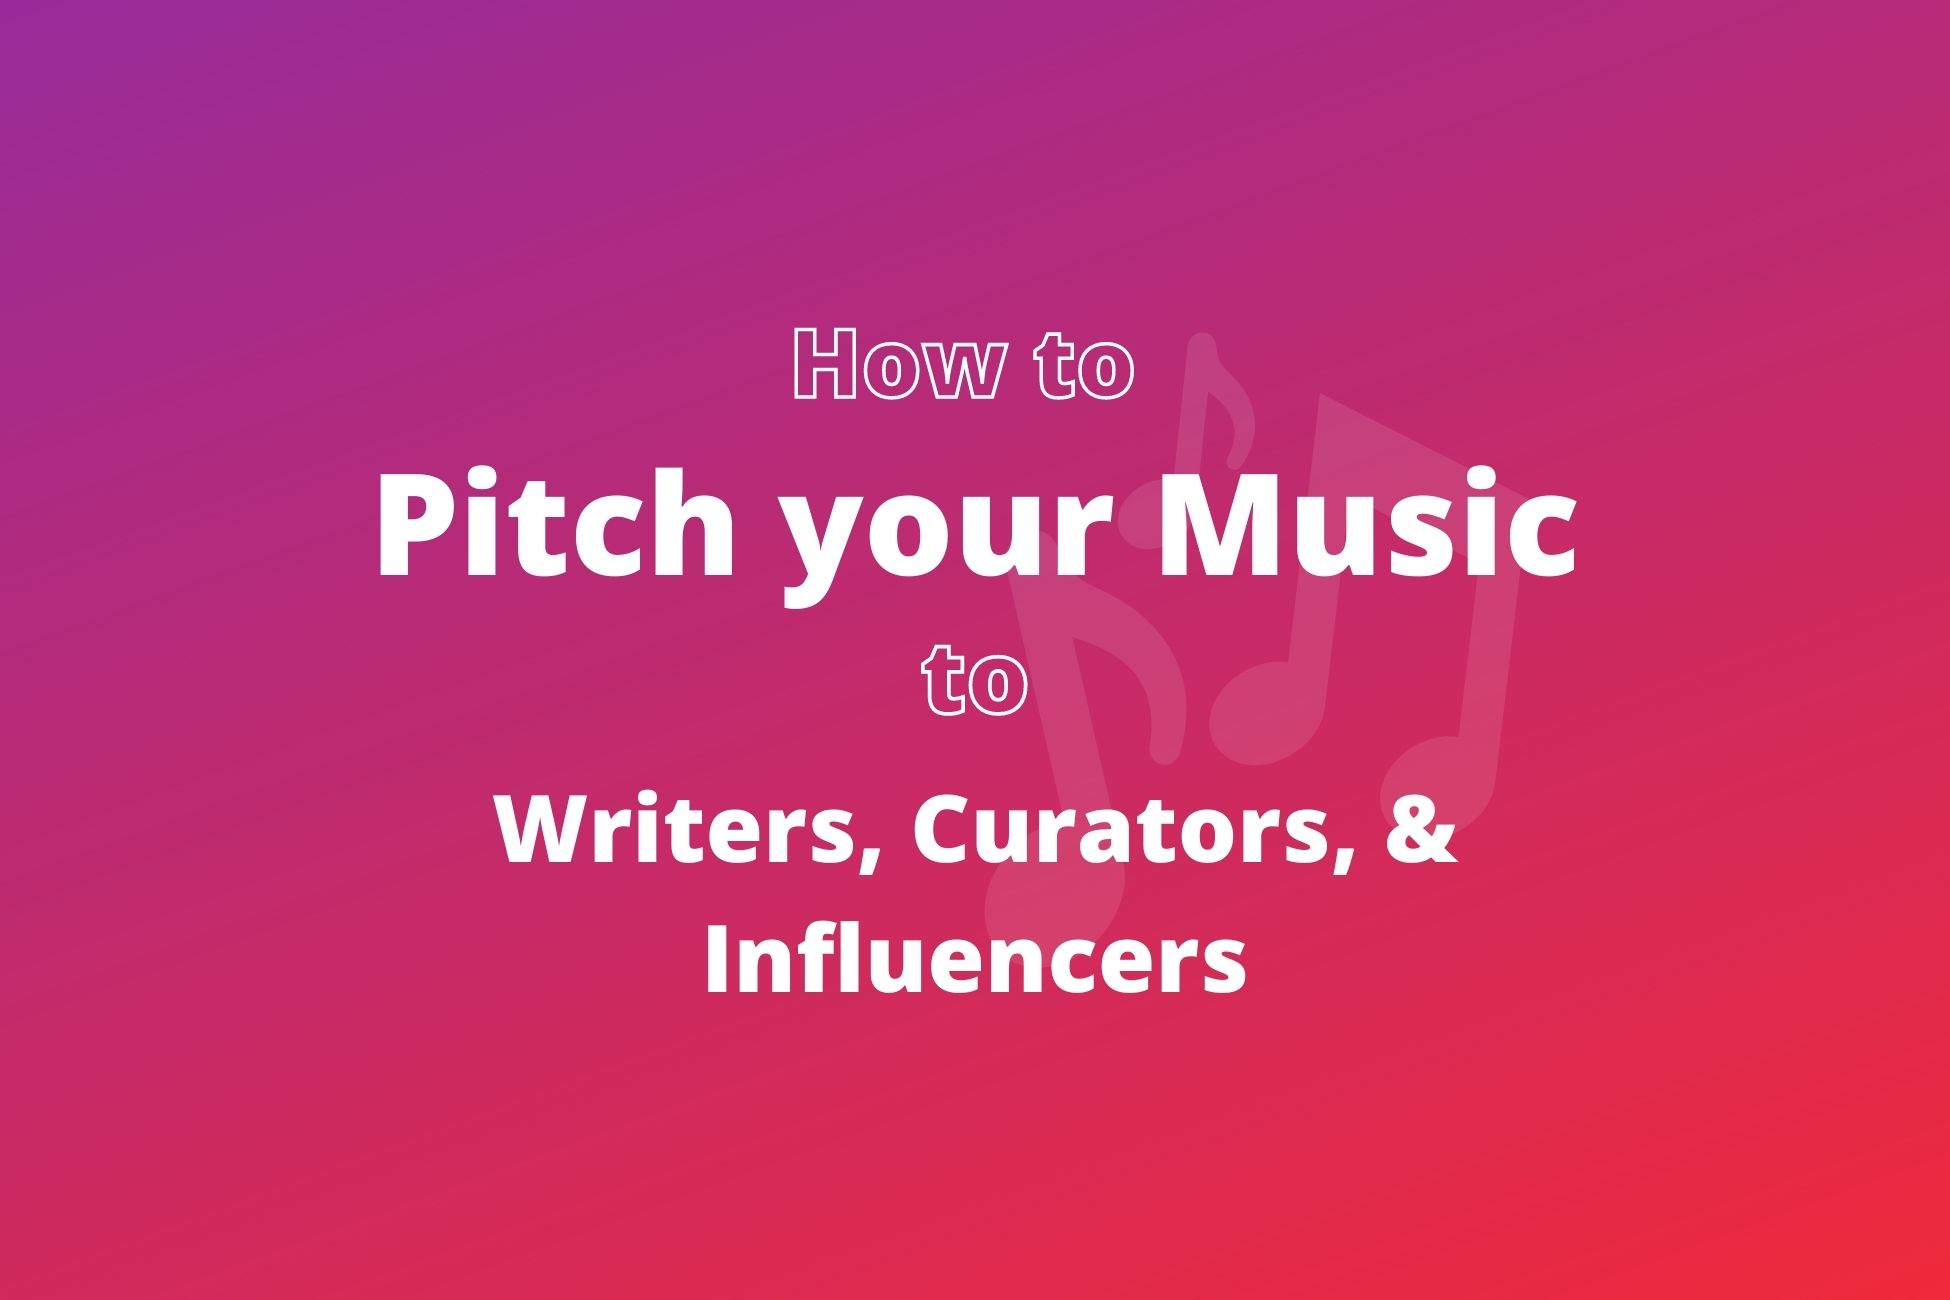 pitch your music to writers, curators, influencers